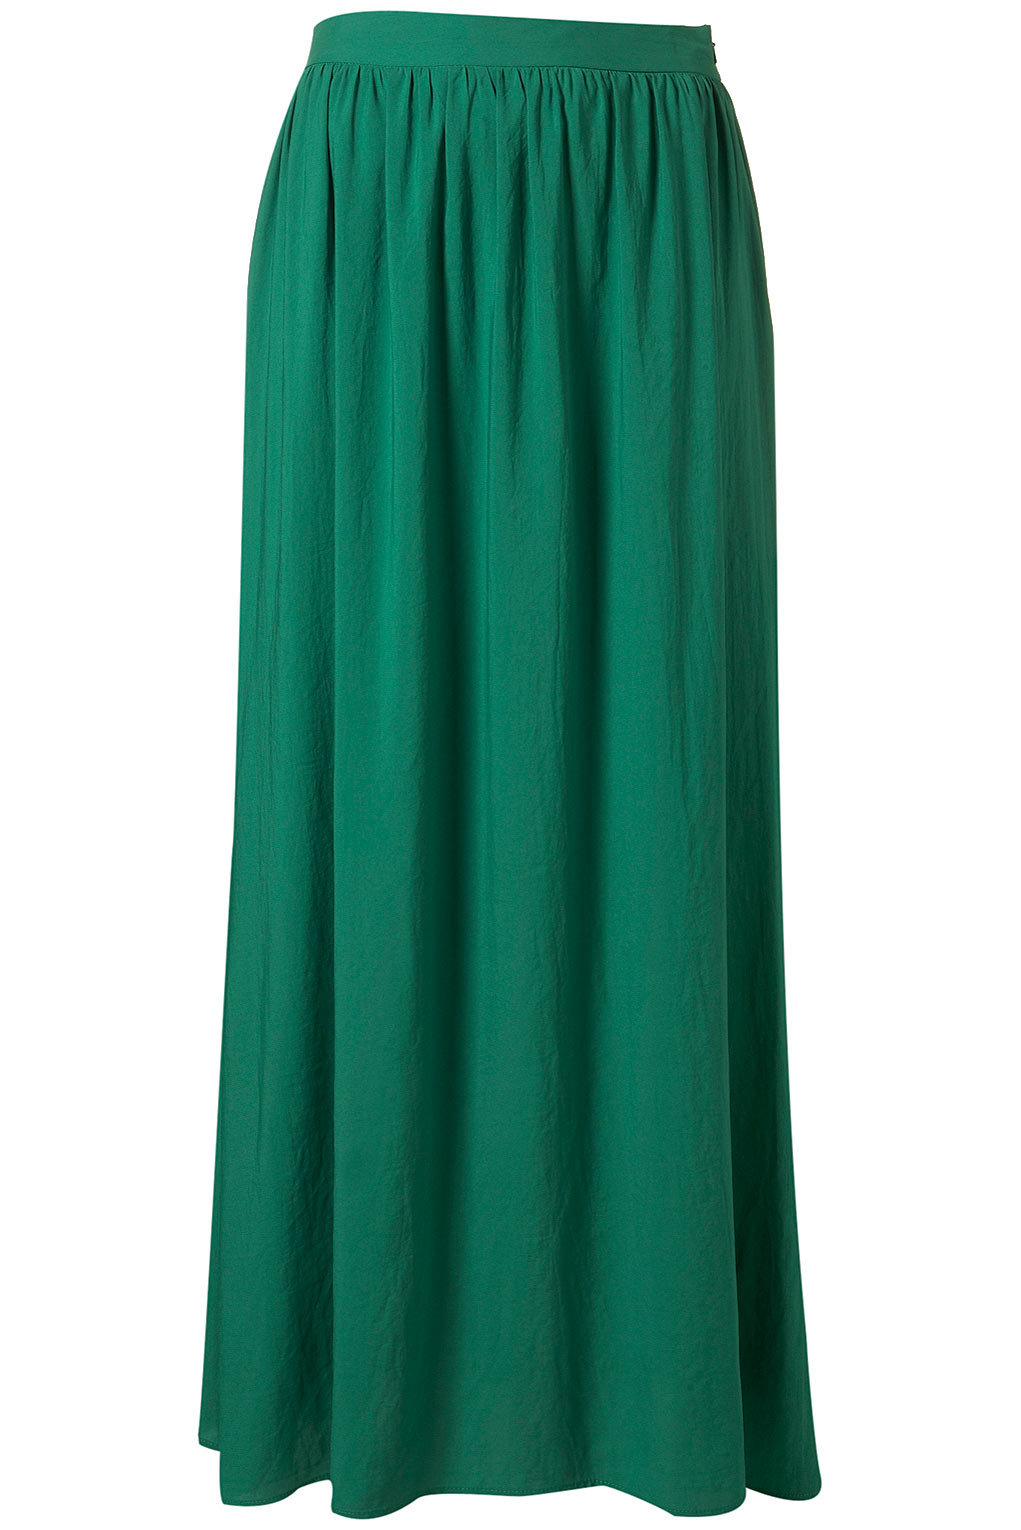 Fashion- An escape from anatomy: The Maxi Skirt